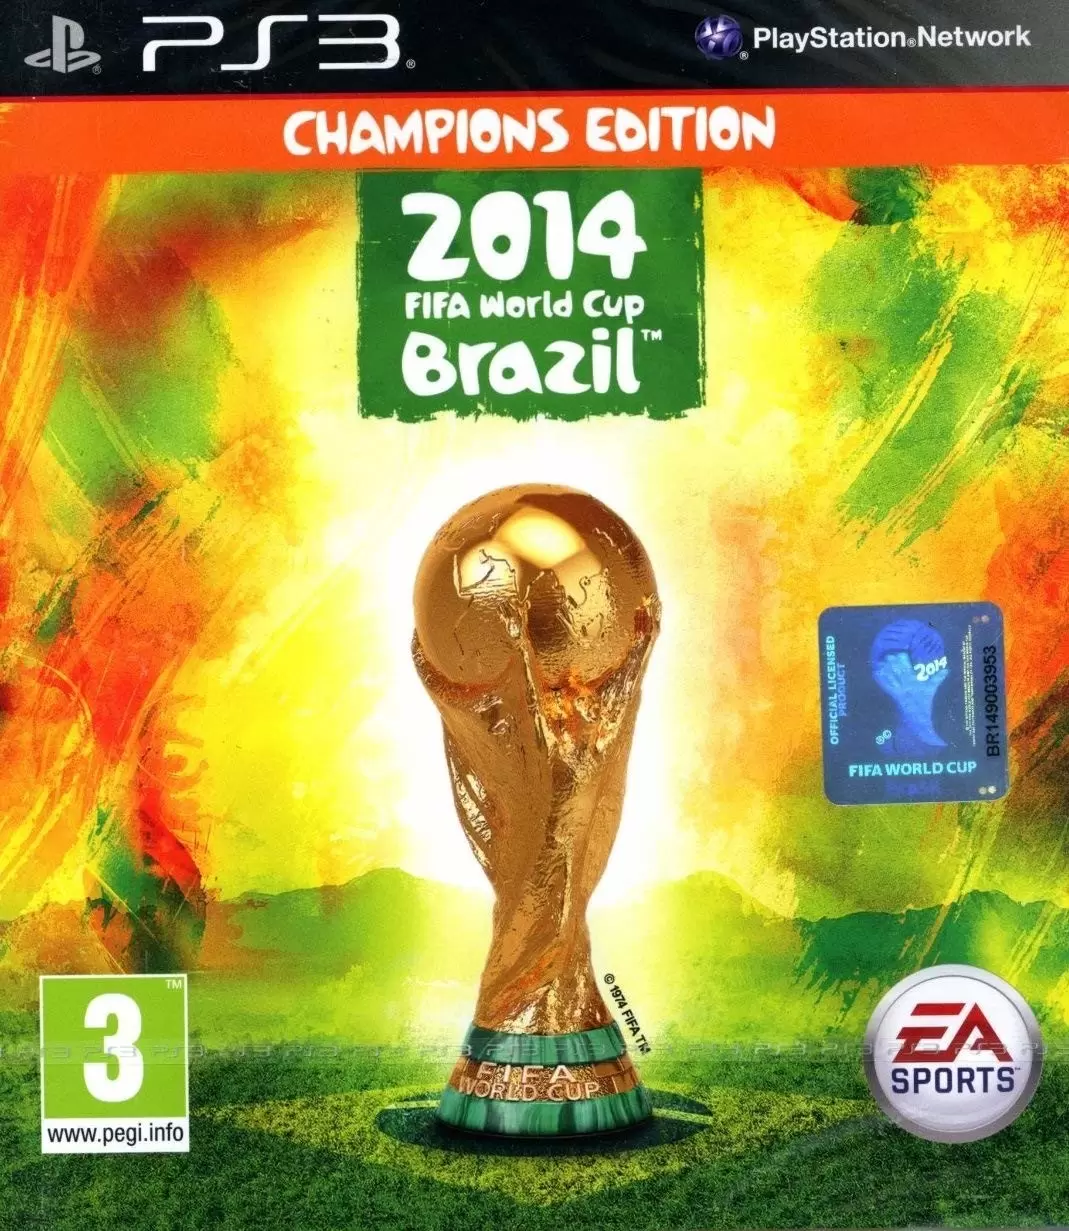 PS3 Games - 2014  FIFA World Cup : Champions Edition